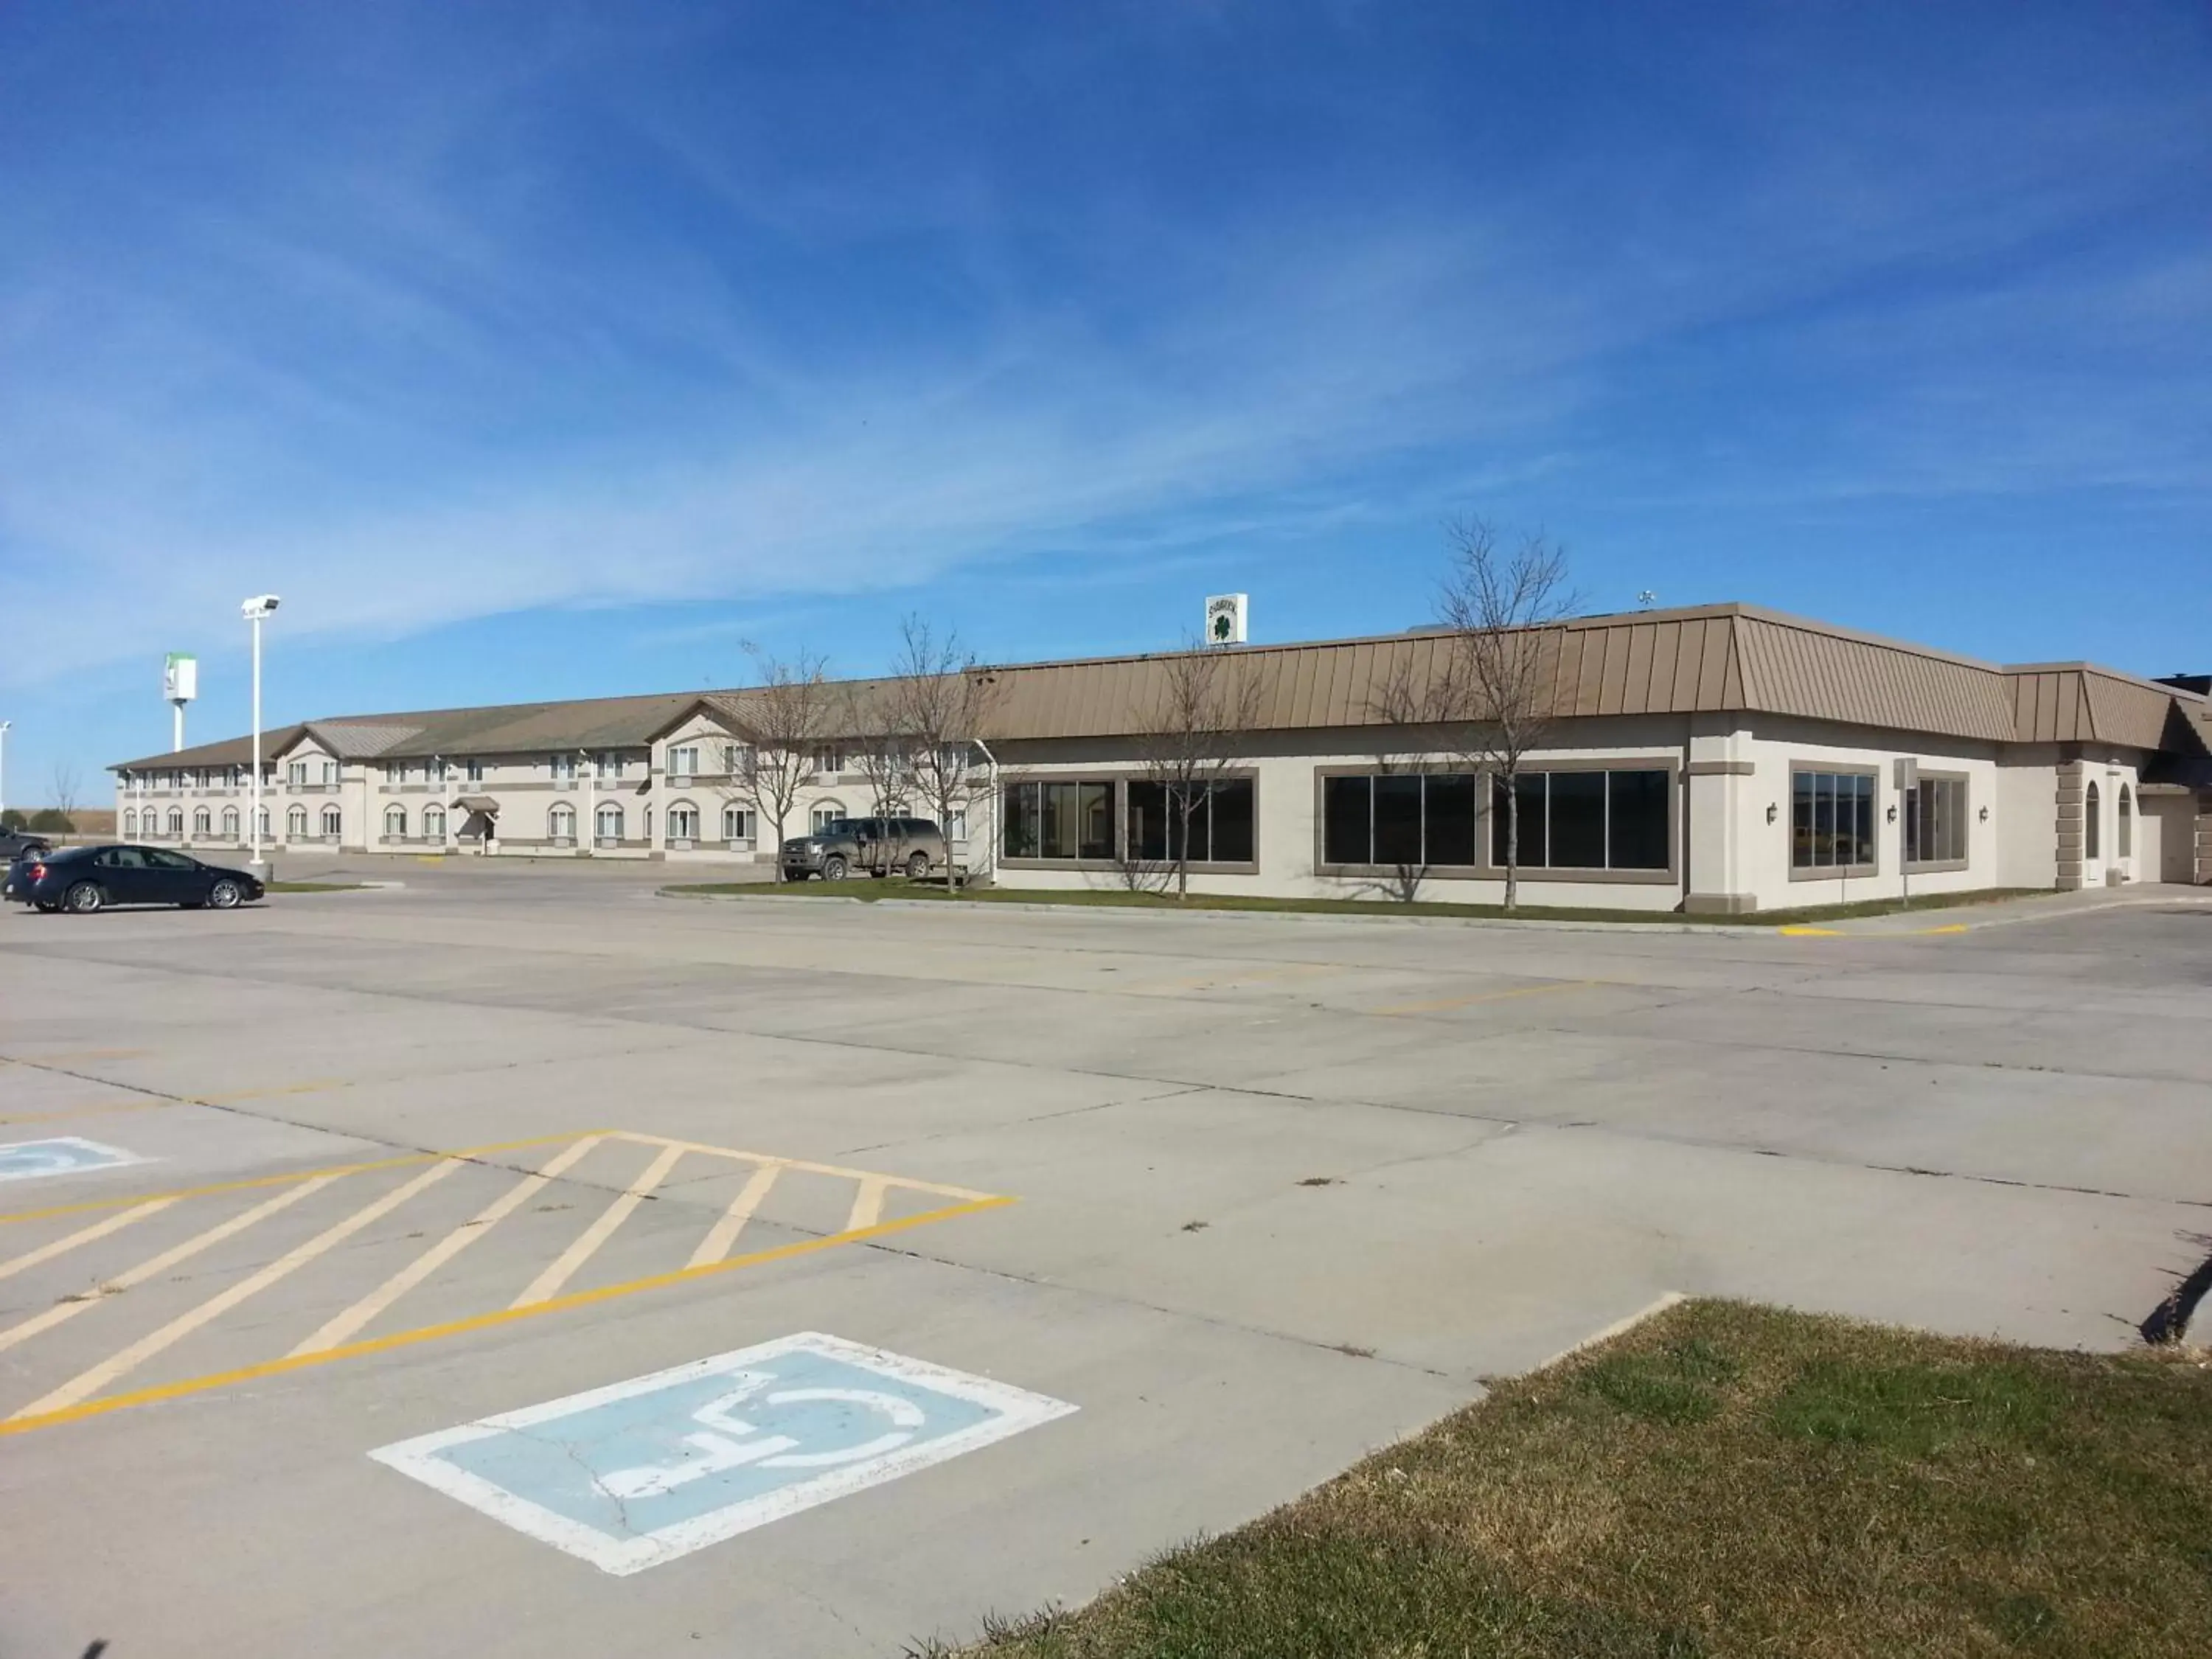 Facade/entrance, Property Building in Country Inn & Suites by Radisson, Sidney, NE